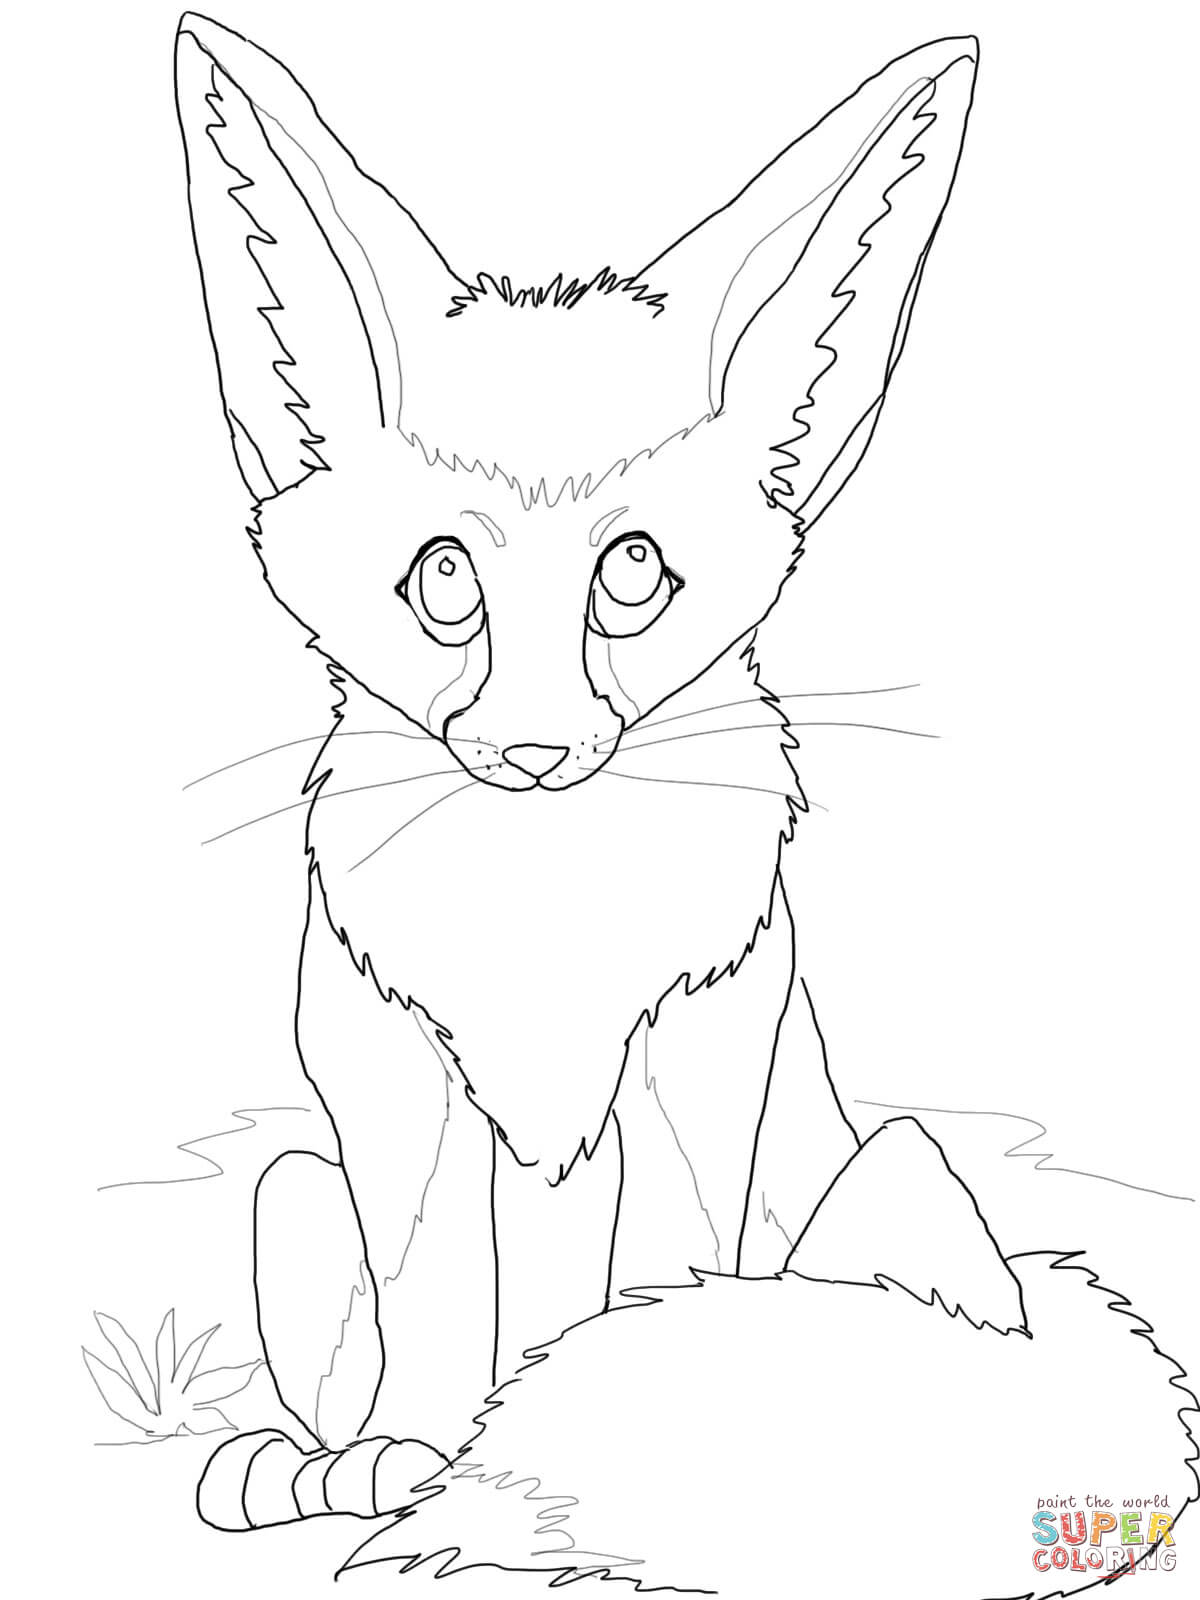 Fennec fox coloring pages | Free Coloring Pages